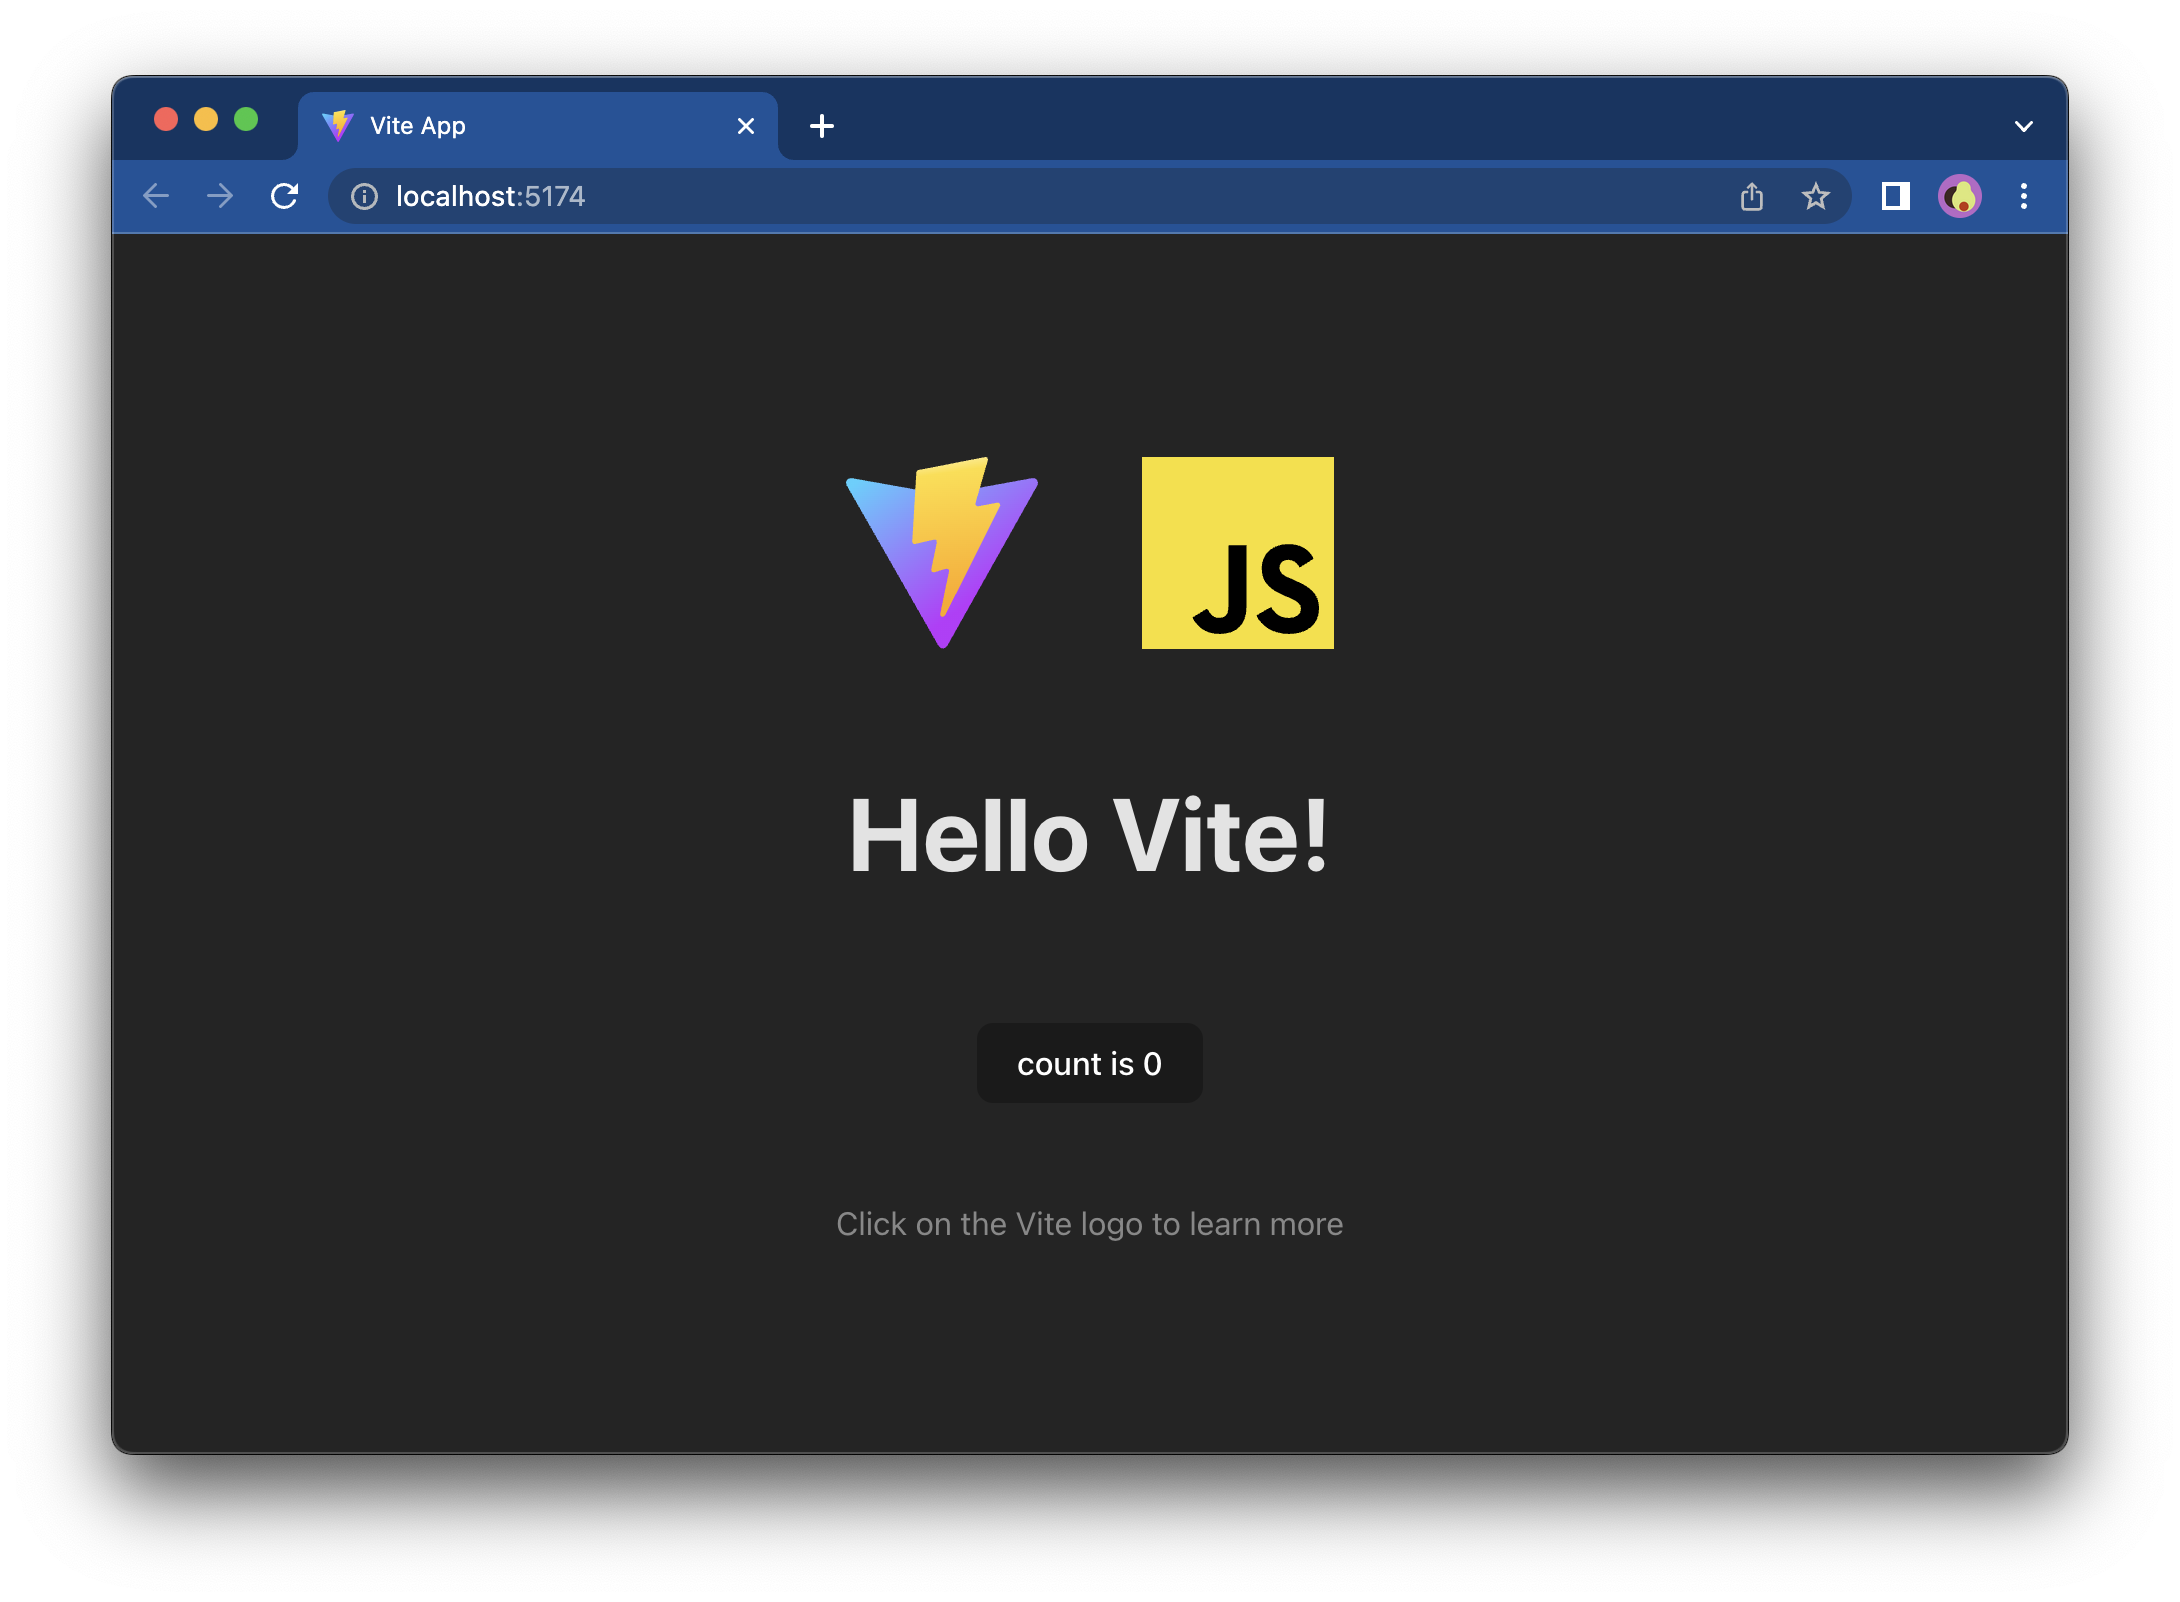 A Vite boilerplate welcome page featuring the logos of Vite and JS, a sign "Hello Vite!" and a counter